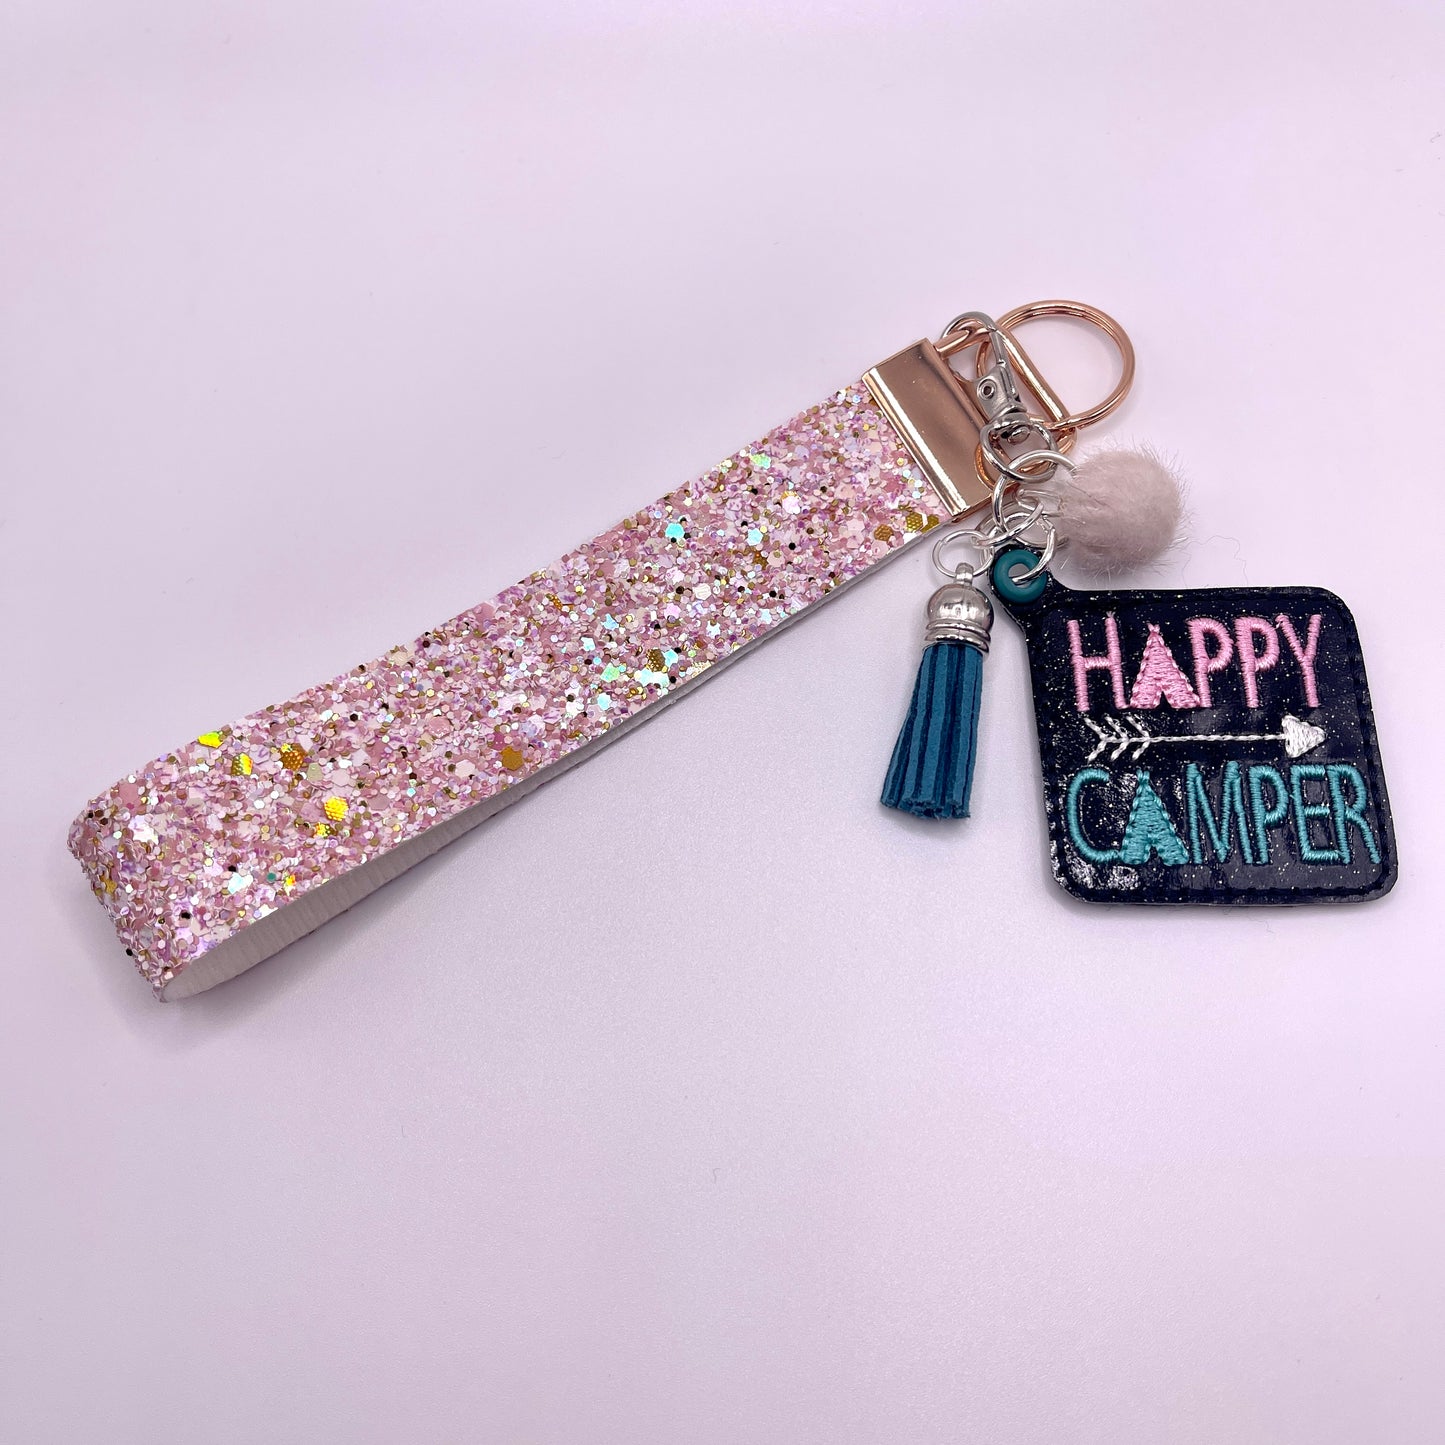 Happy Camper Keychain and Wristlet